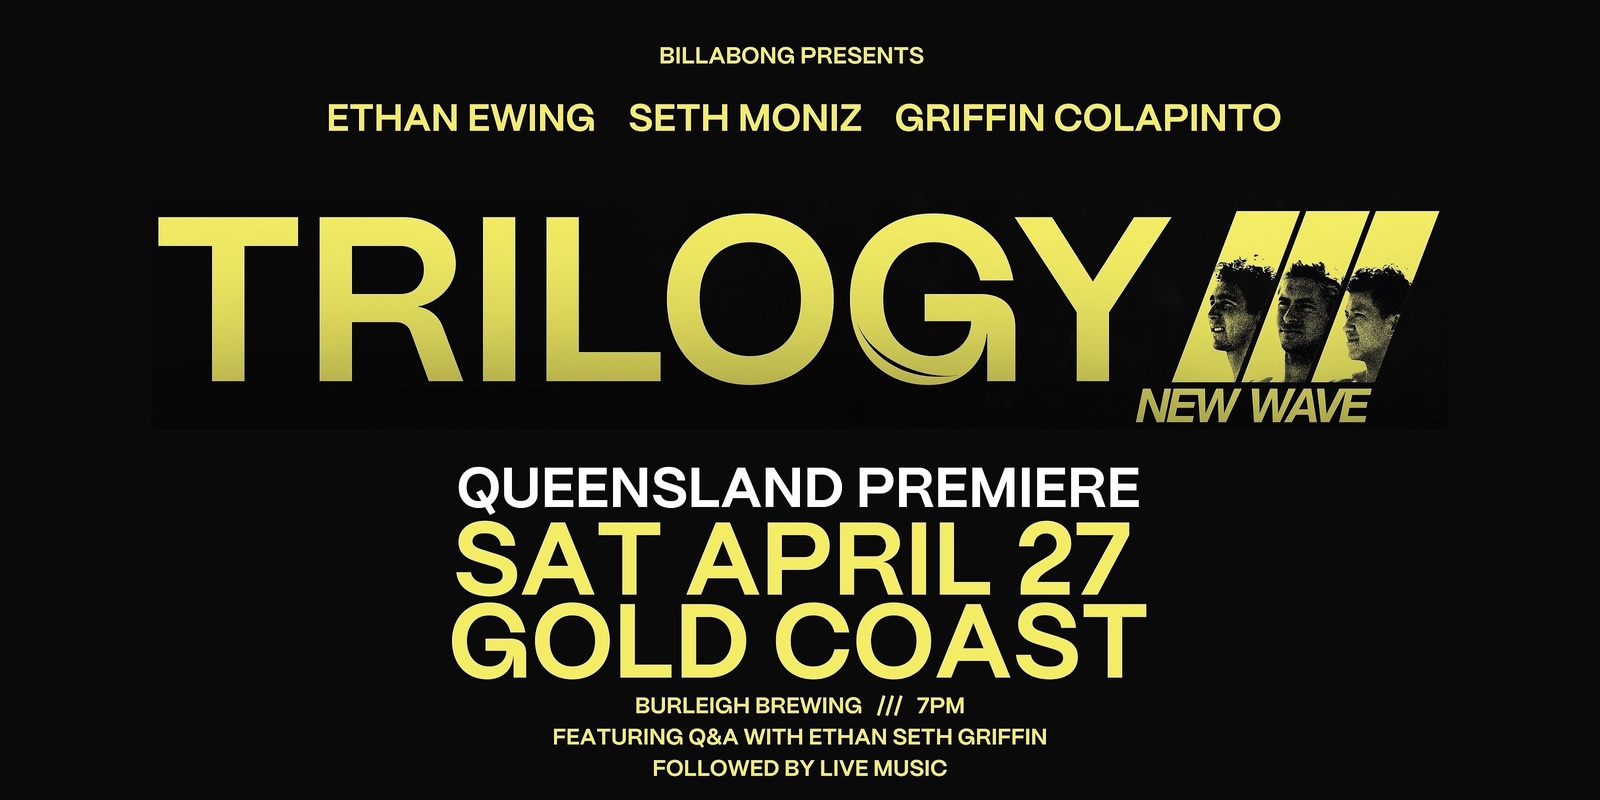 Banner image for Billabong presents Trilogy: New Wave - QLD Premiere - SOLD OUT - click "get tickets" to join waitlist